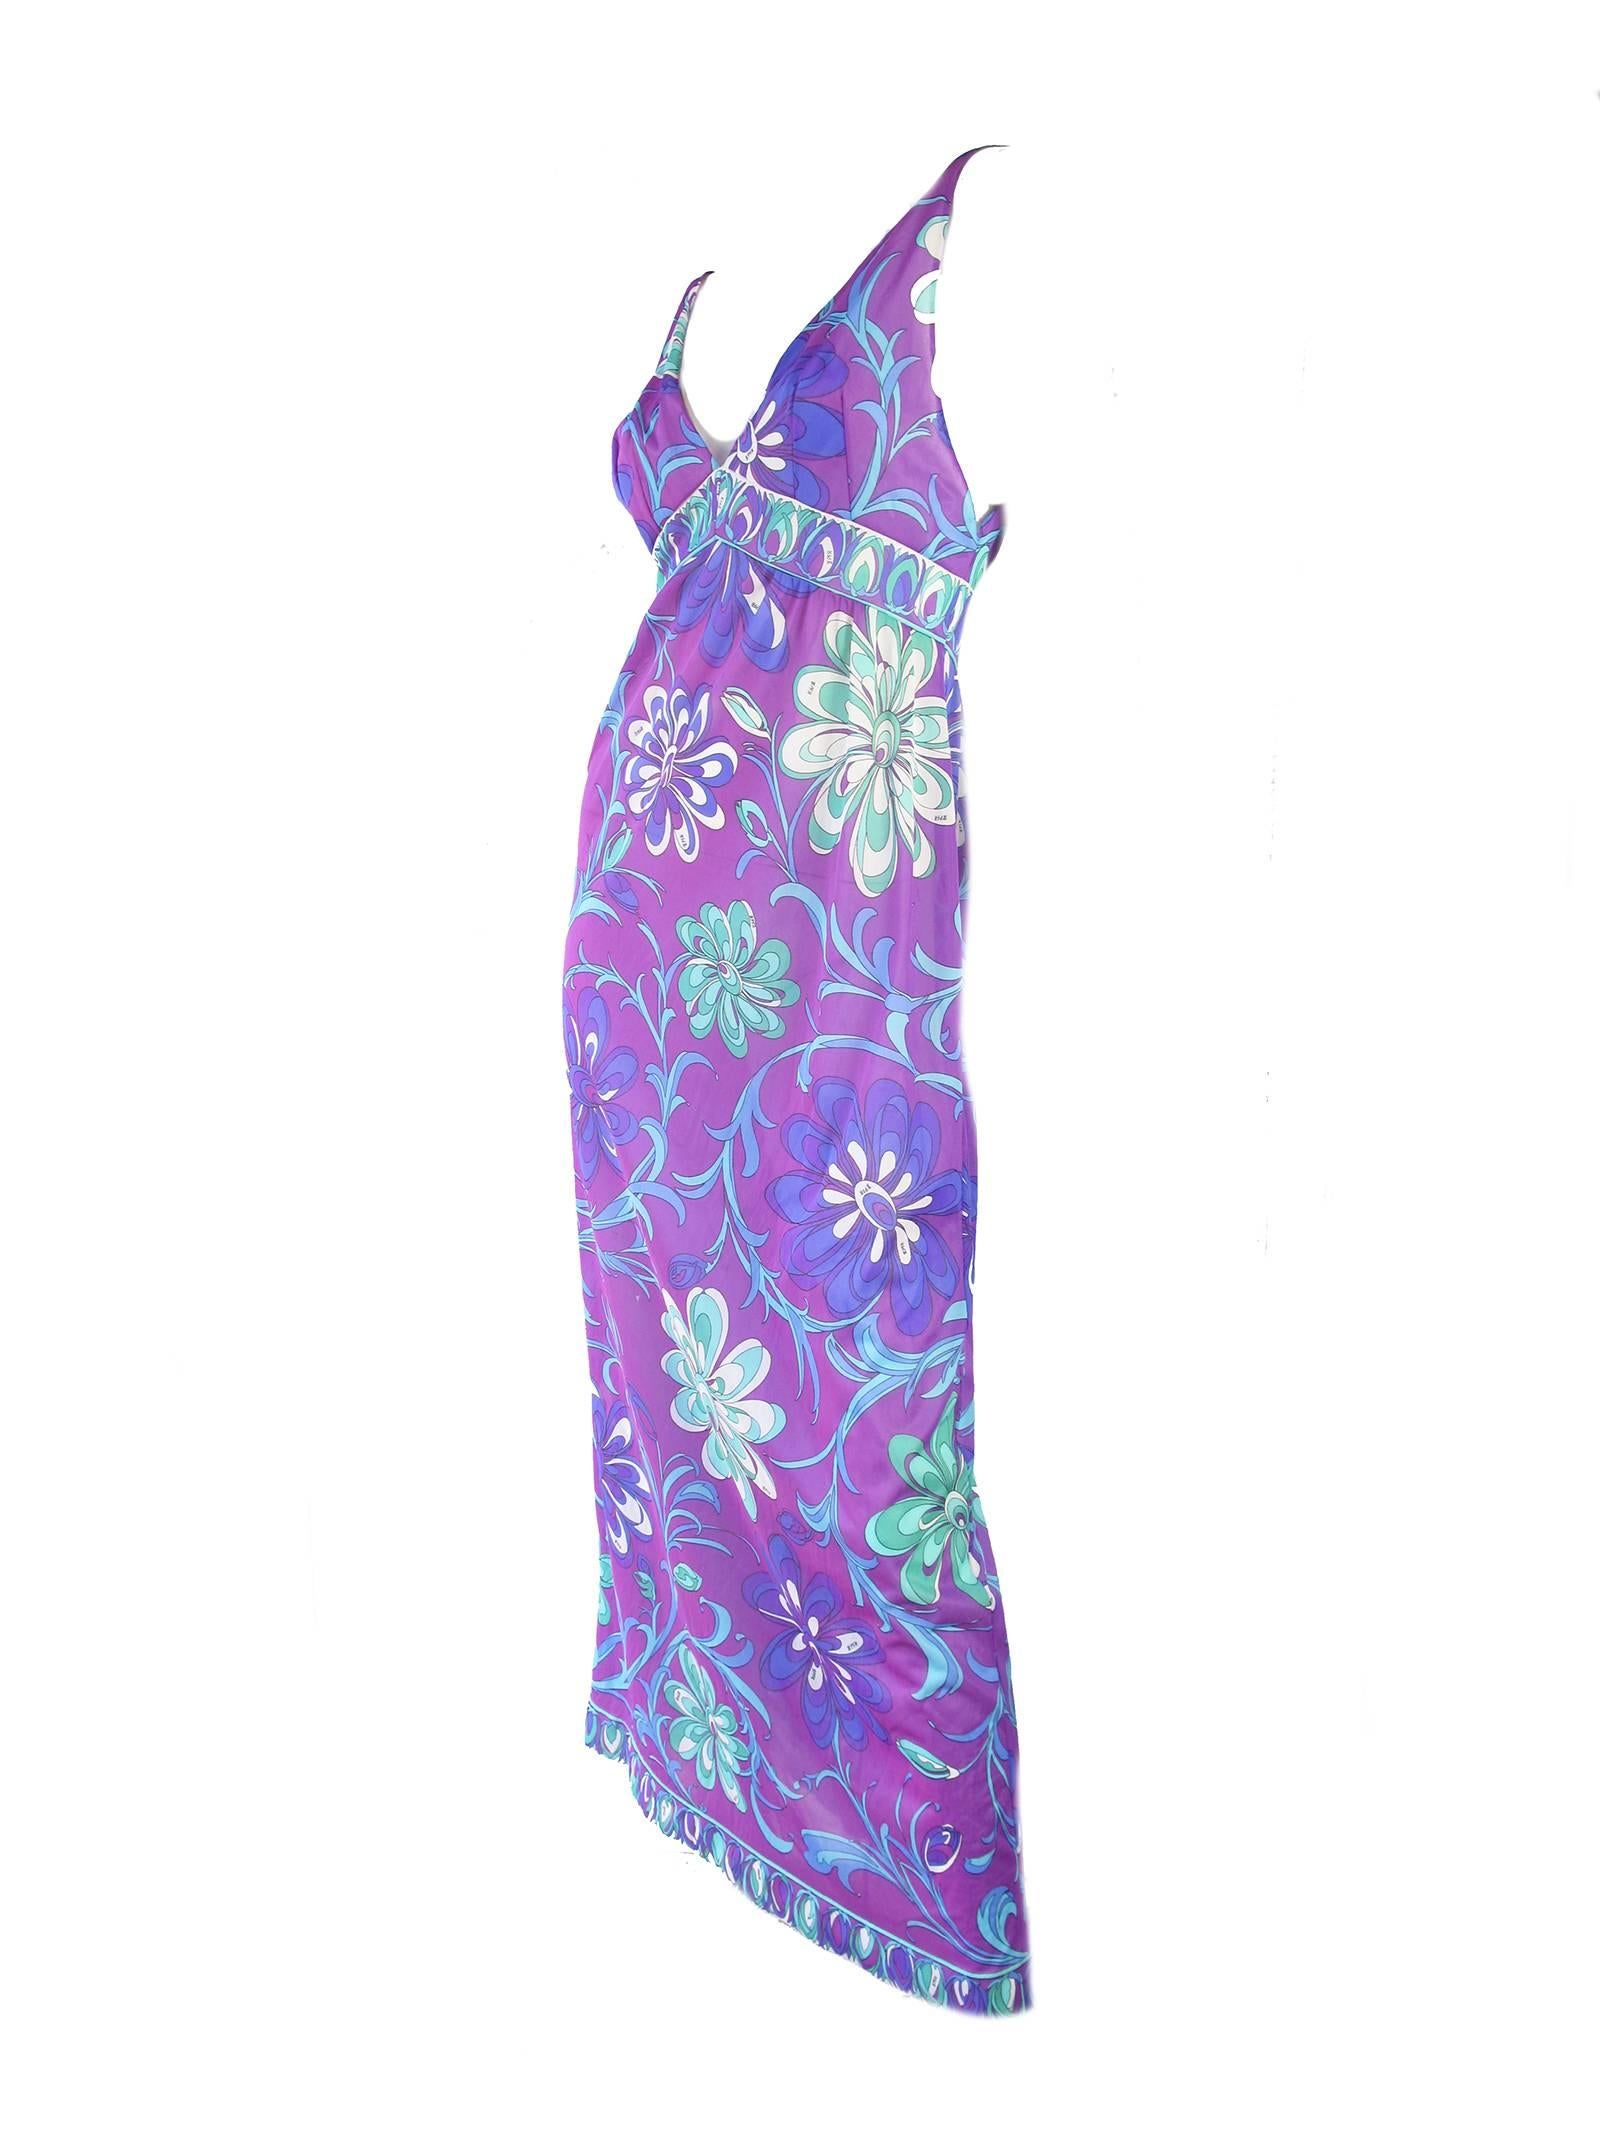 Pucci purple Form Fit Rogers Robe and Gown.  Condition: Excellent. Size Small
We accept returns for refund, please see our terms.  We offer free ground shipping within the US